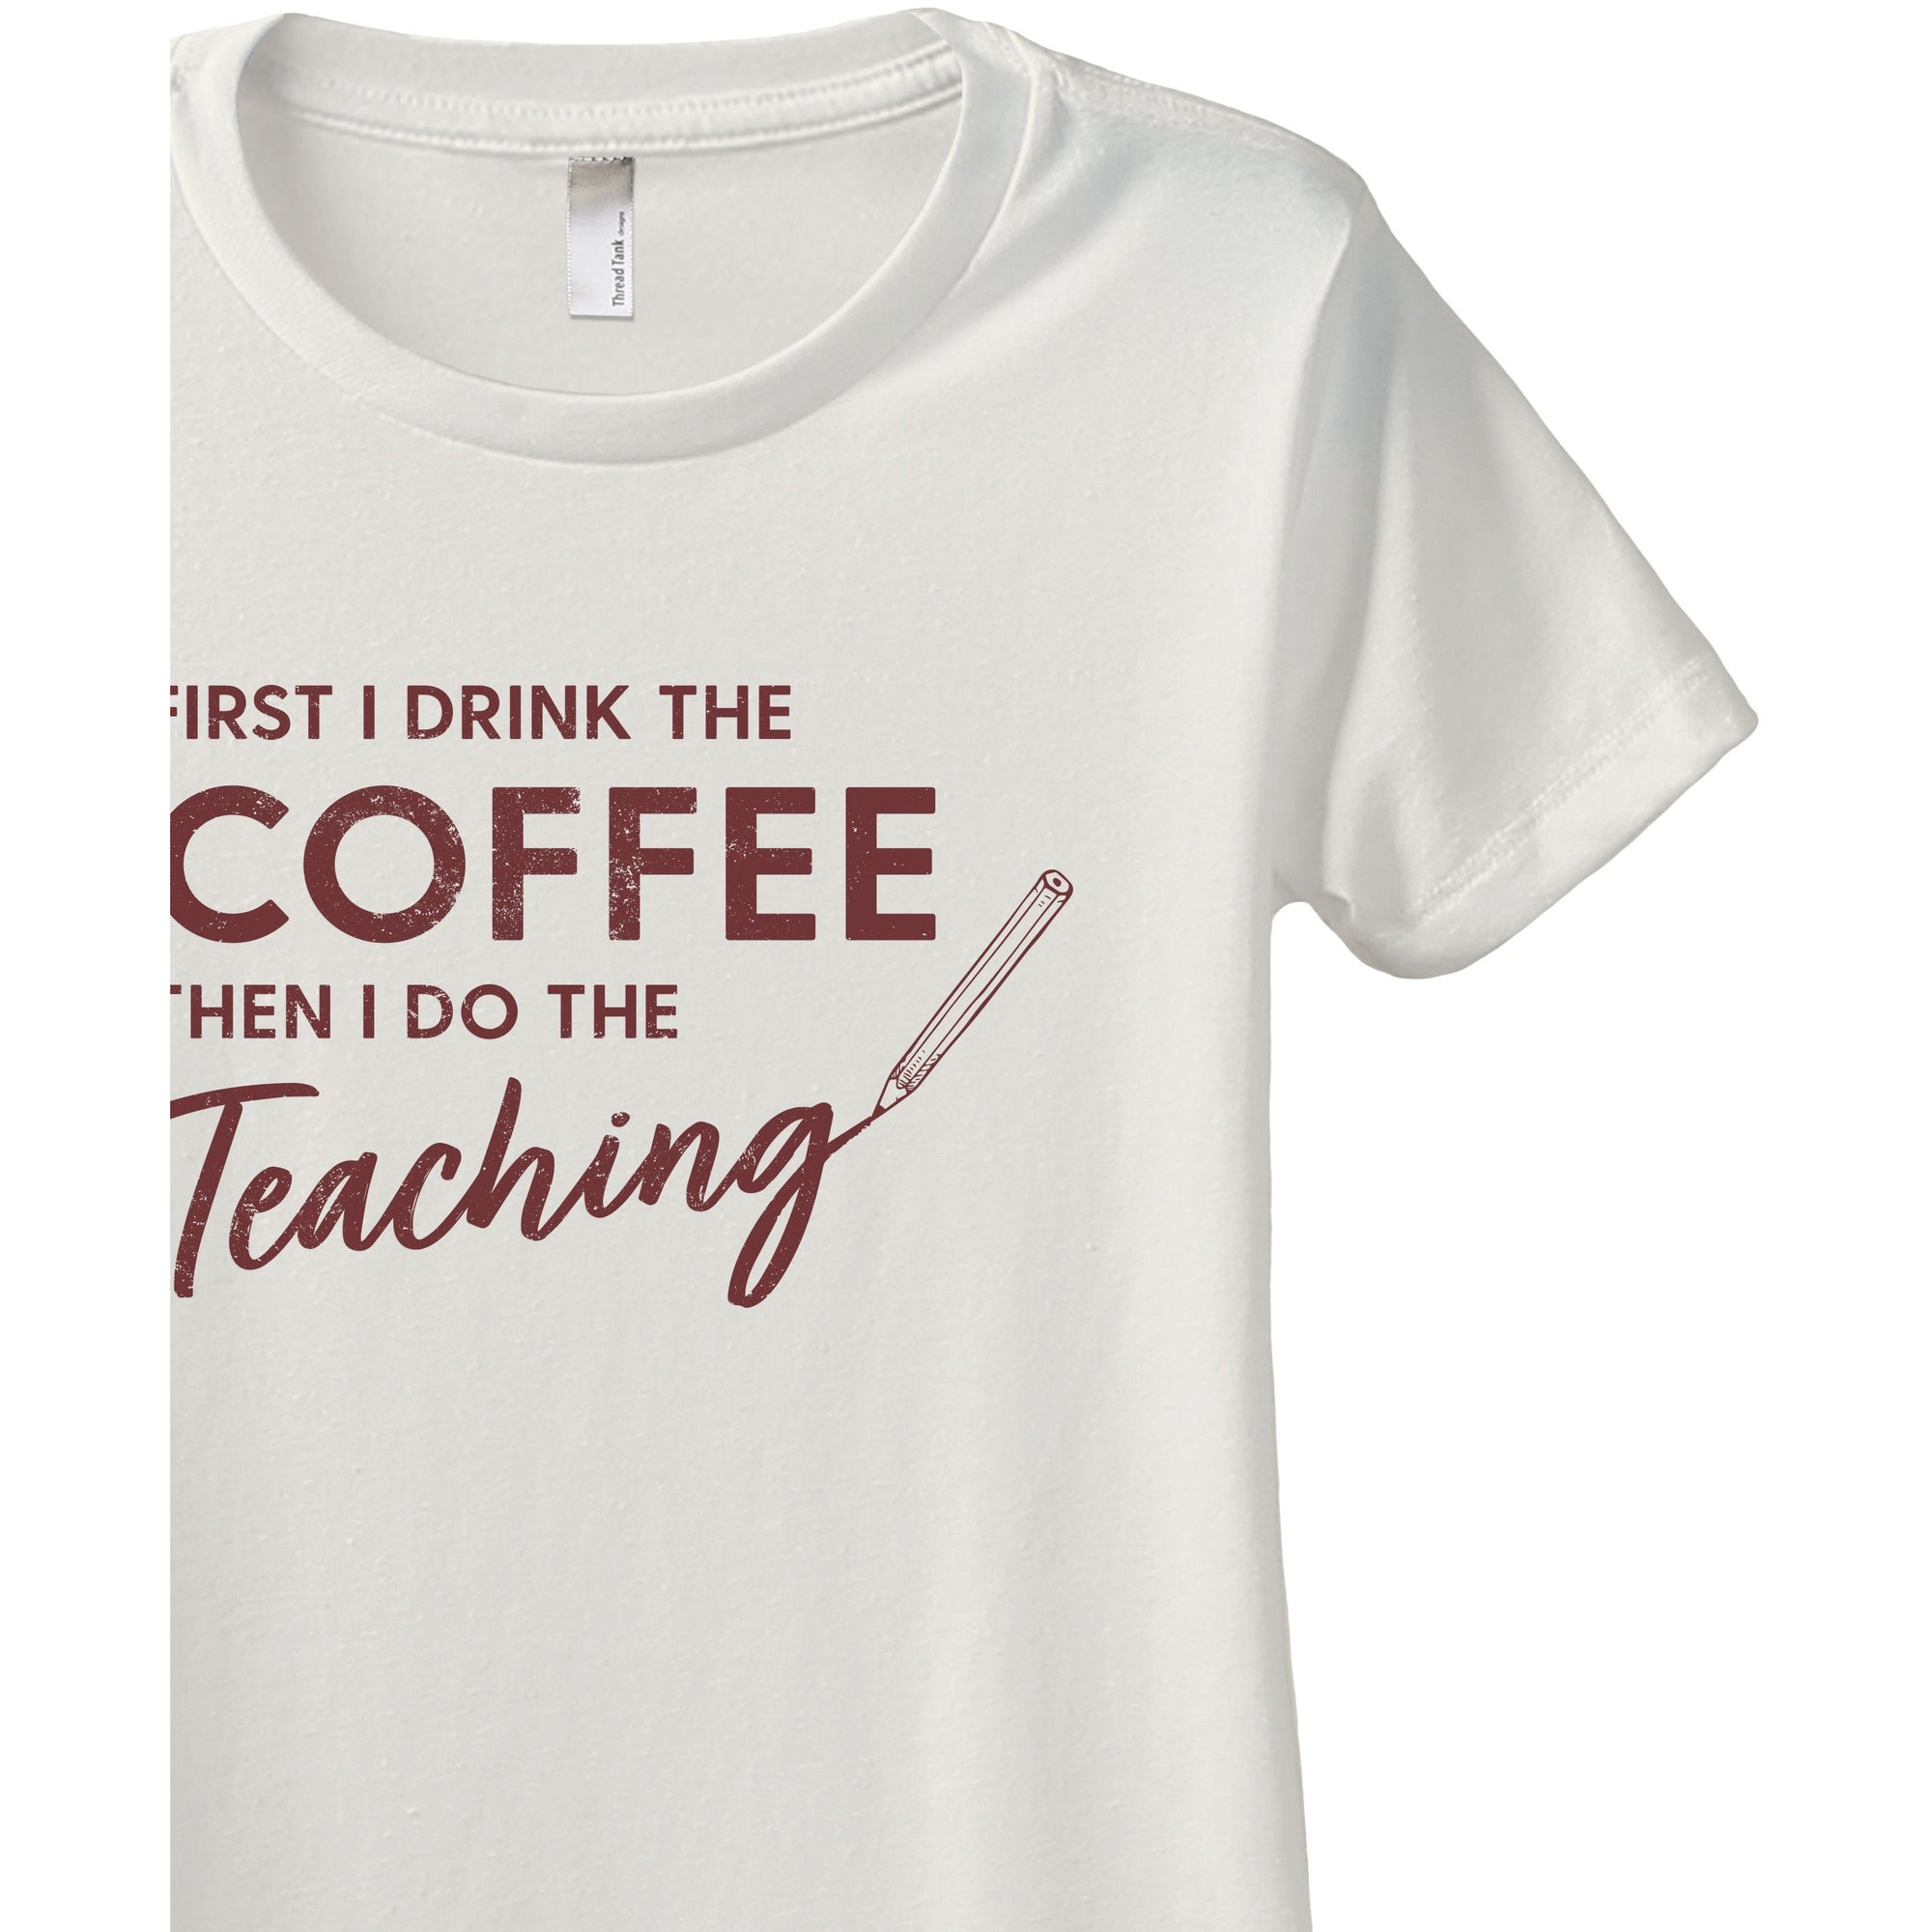 First I Drink The Coffee Then I Do The Teaching Women's Relaxed Crewneck T-Shirt Top Tee Vintage White Scarlet